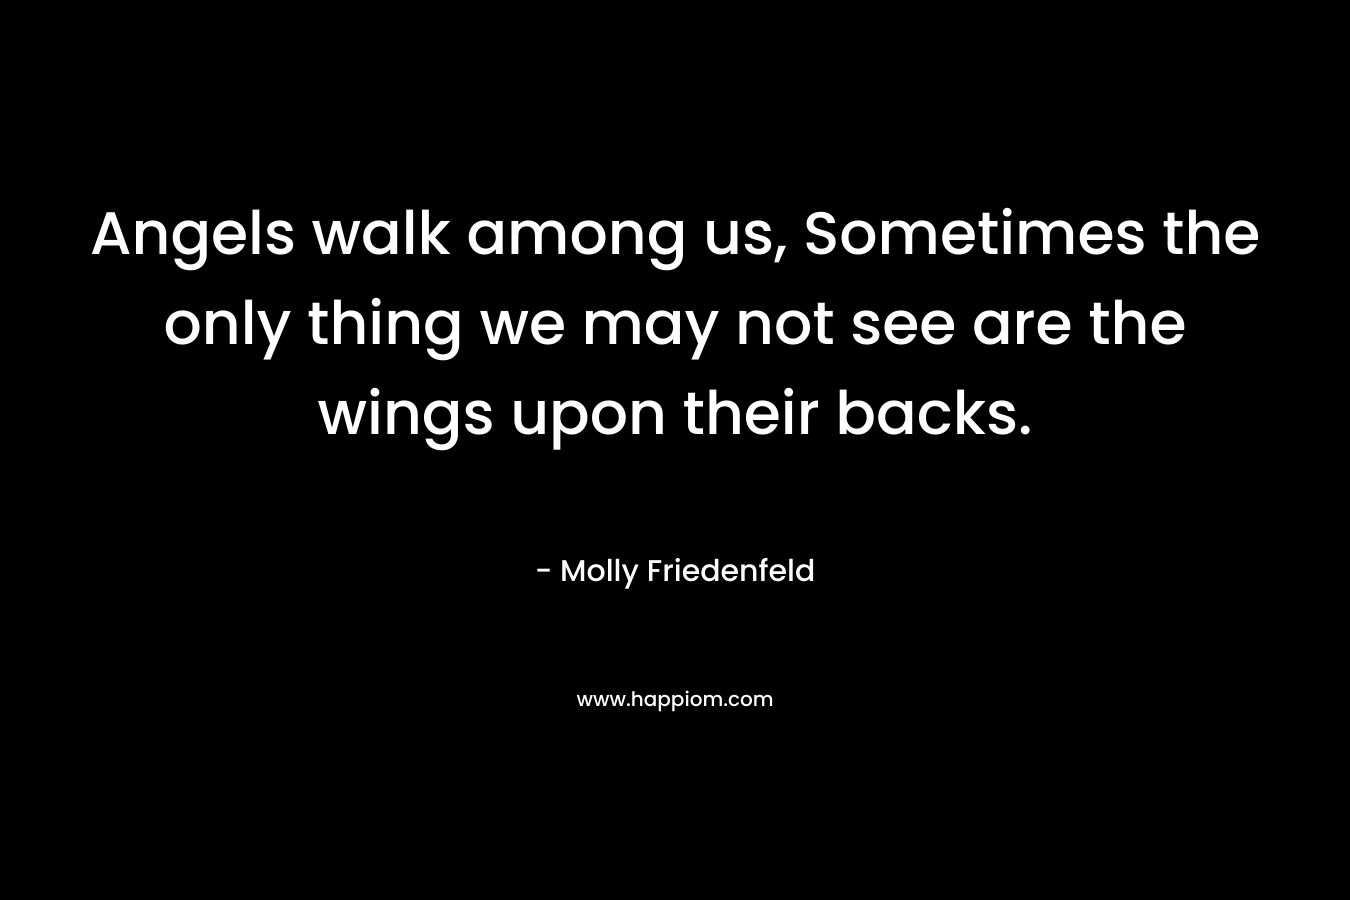 Angels walk among us, Sometimes the only thing we may not see are the wings upon their backs.